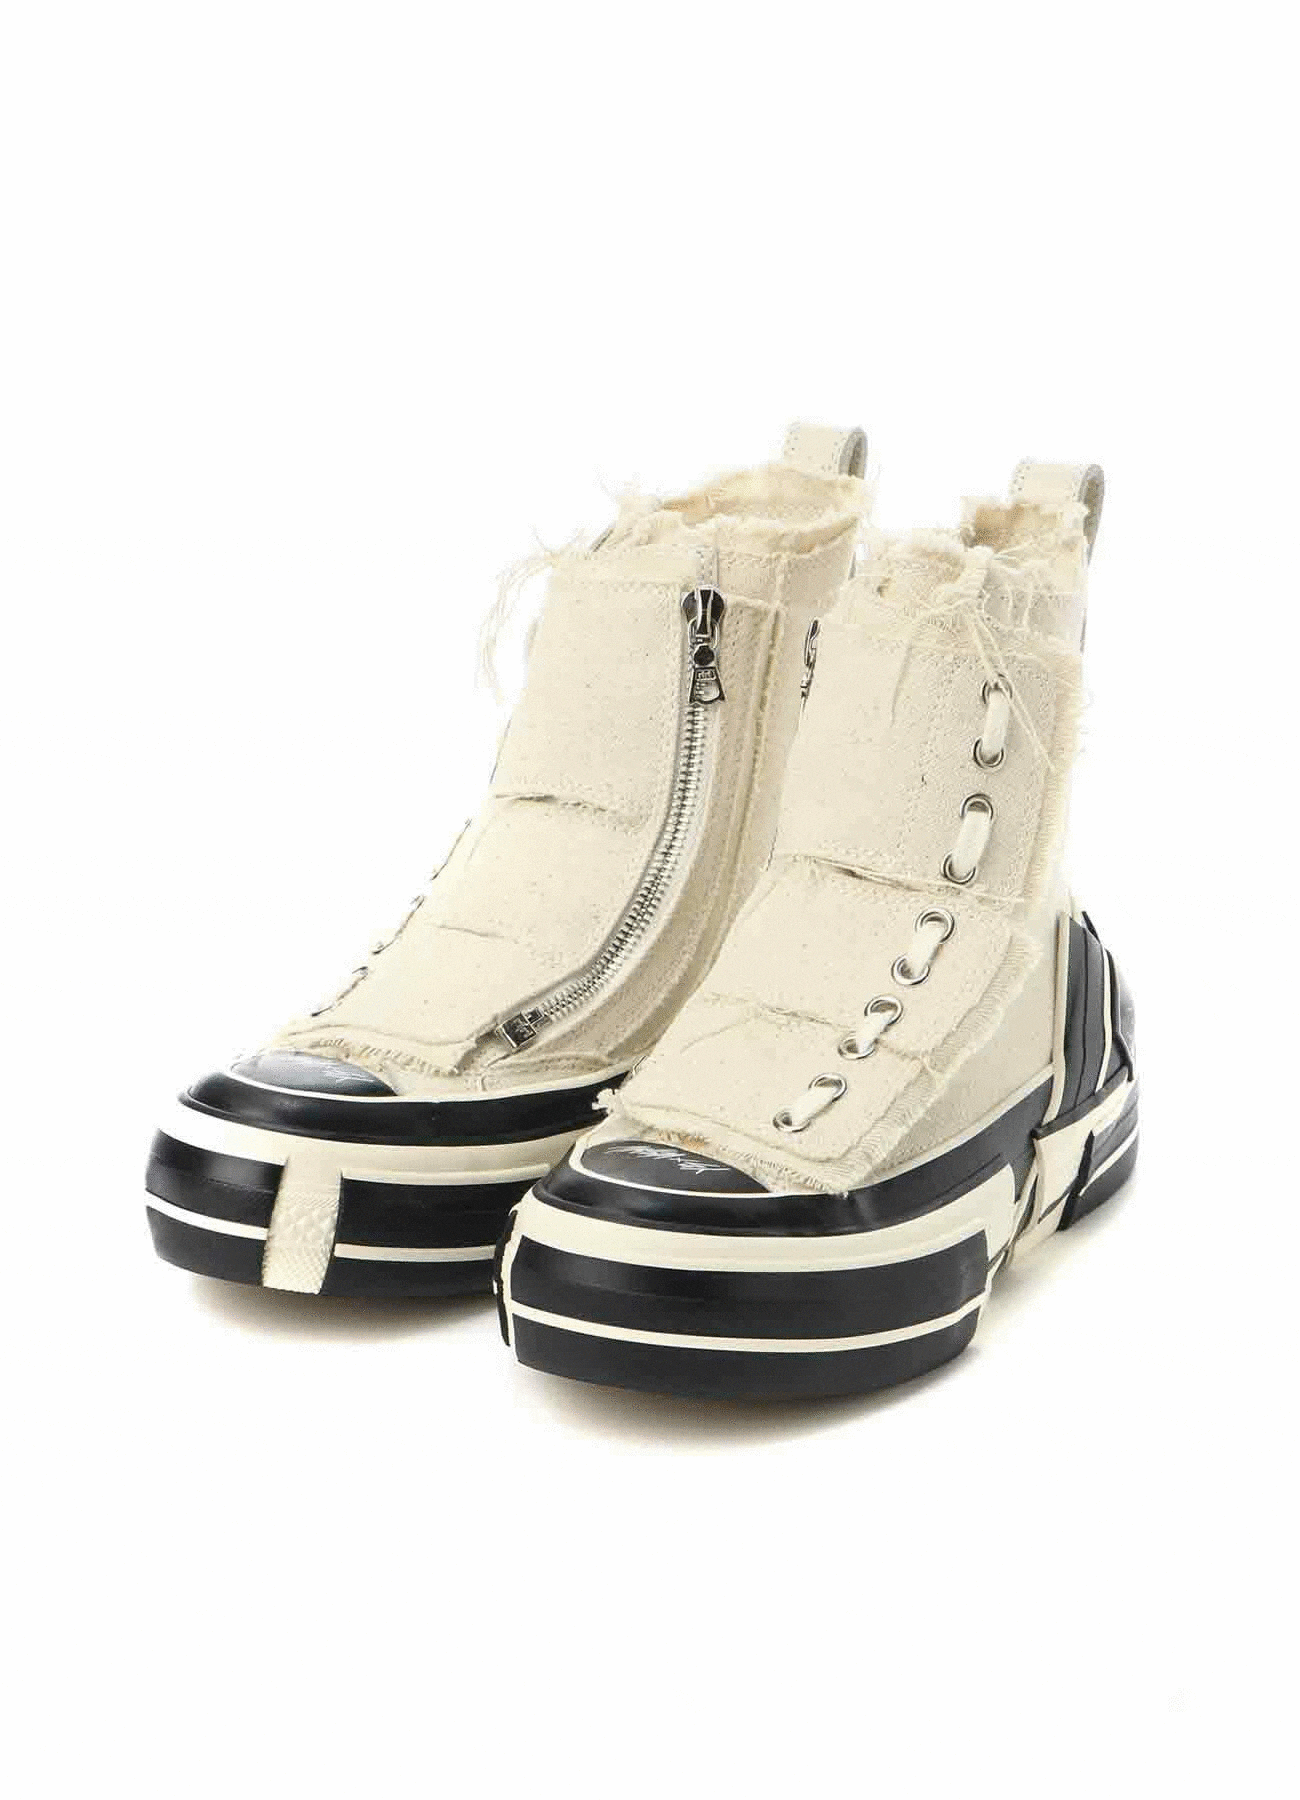 Y's × xVessel HIGH-CUT SNEAKERS(22.5 WHITE): Vintage｜THE SHOP 